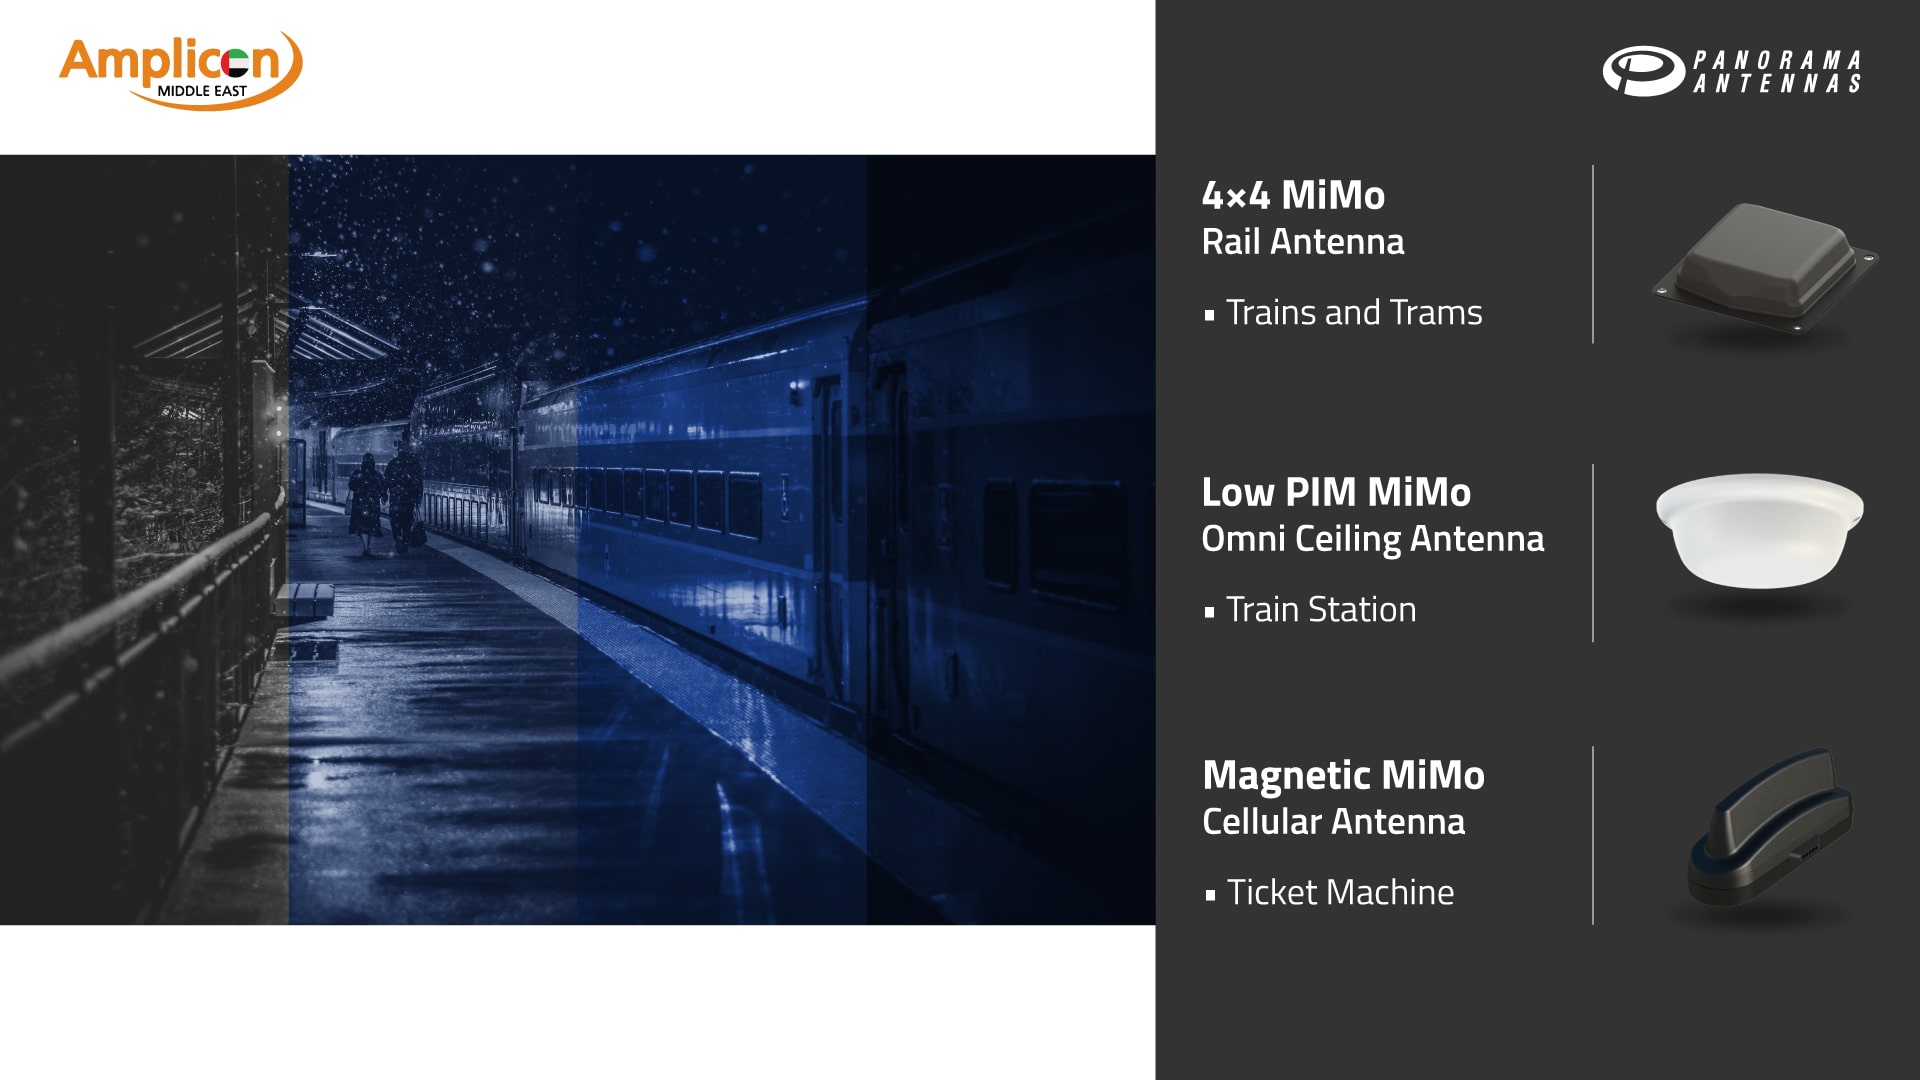 Panorama-Antennas-Railway-Campaign-Amplicon-Middle-East-Blog